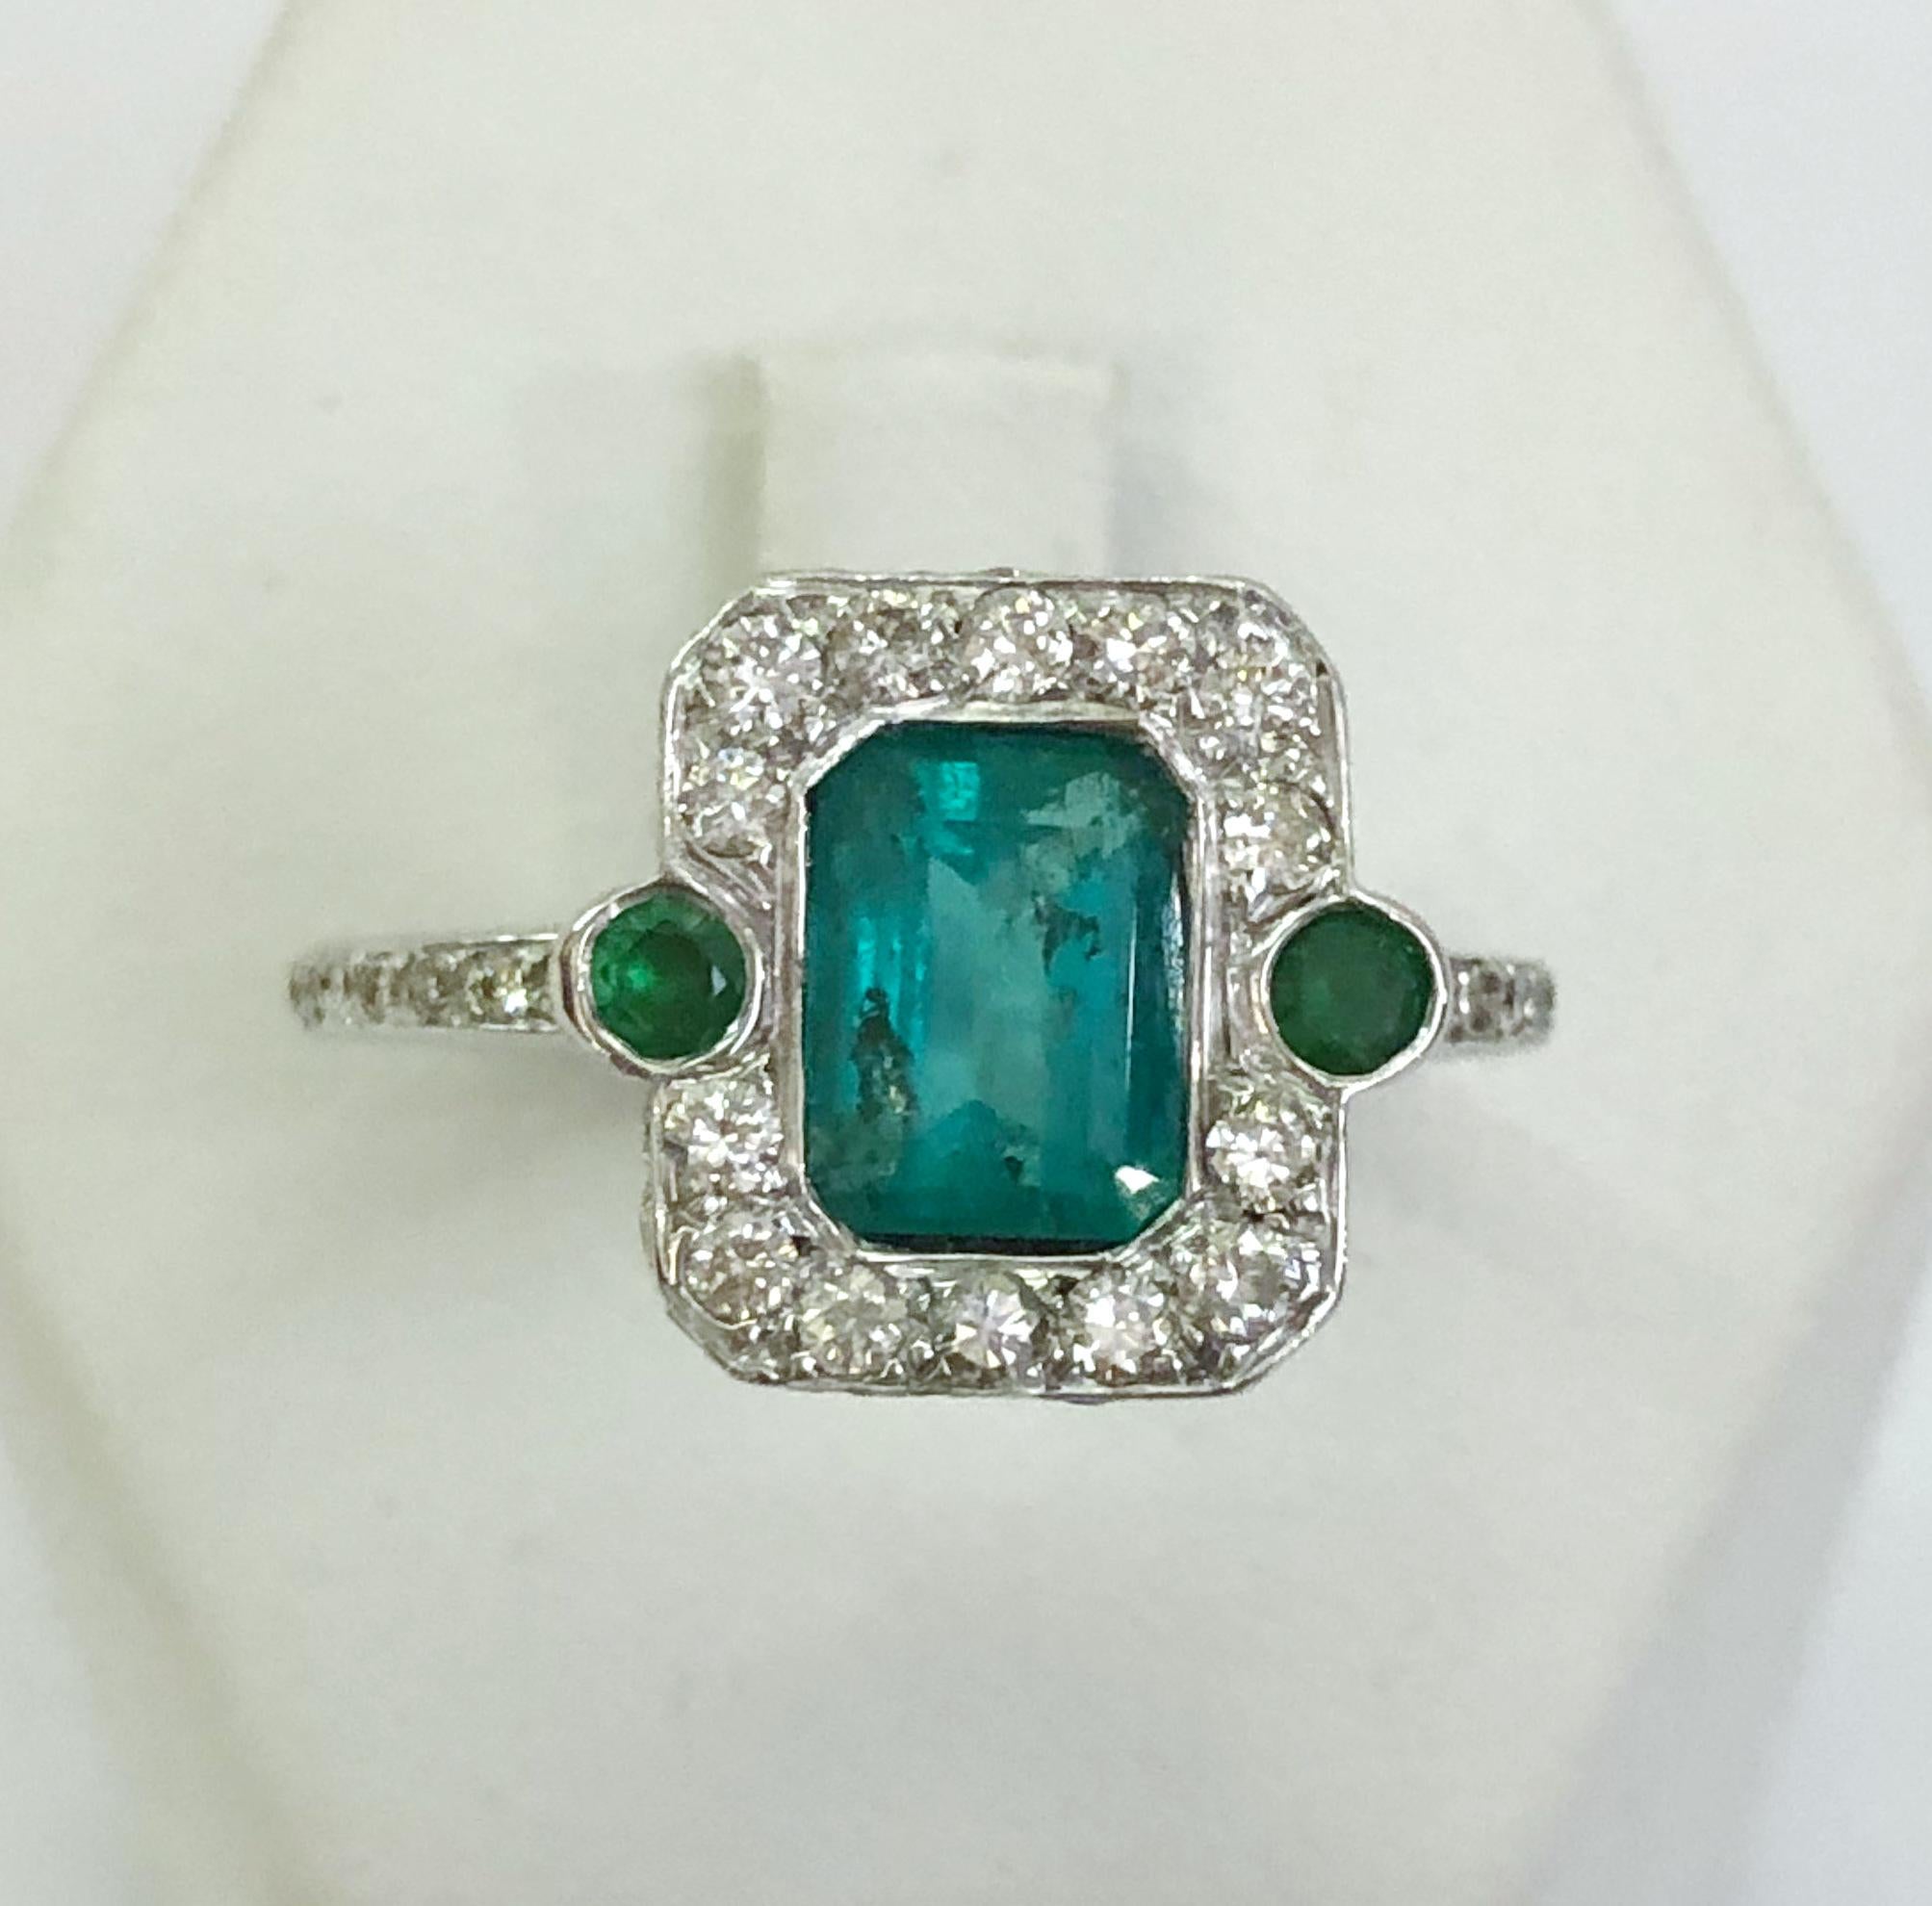 18 karat white gold ring with an emerald of 1.8 carats and diamonds of 0.5 carats / Made in Italy 1960s
Ring size US 6.75